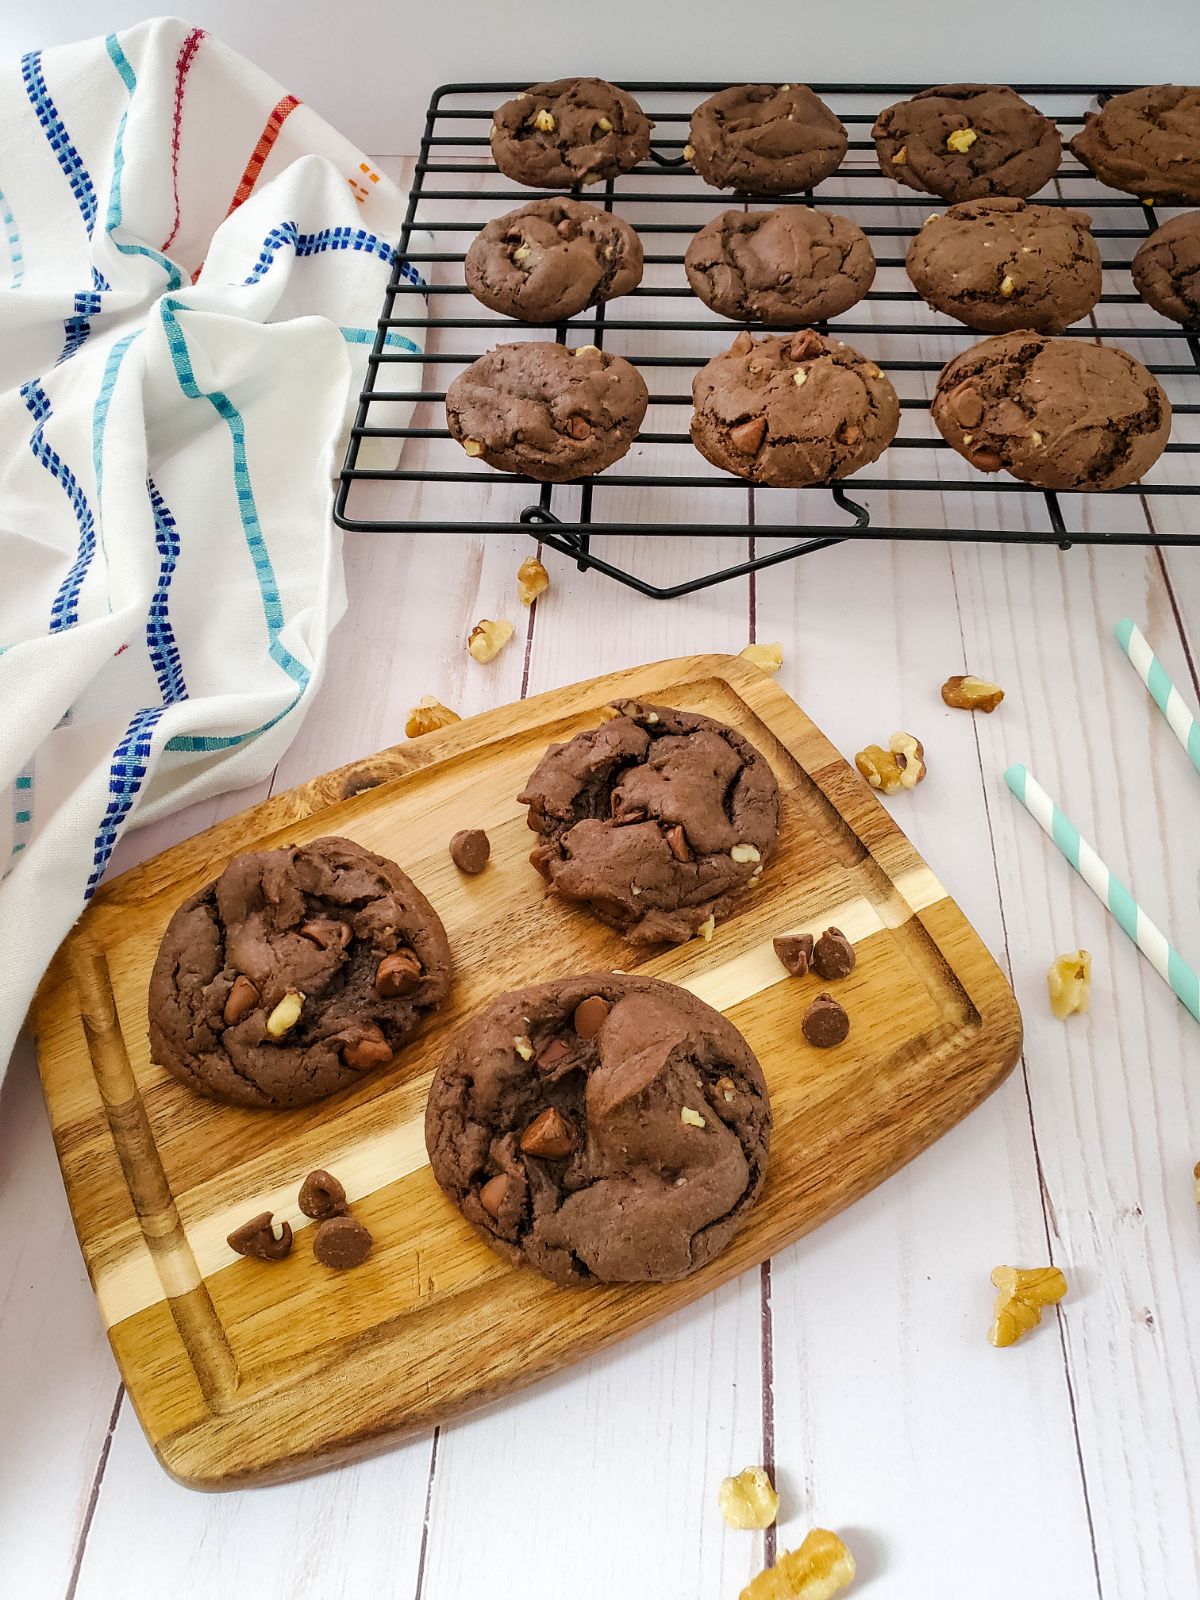 3 Double Chocolate Walnut Cake Mix Cookies on a wooden chopping board and the other cookies on a cooling rack.